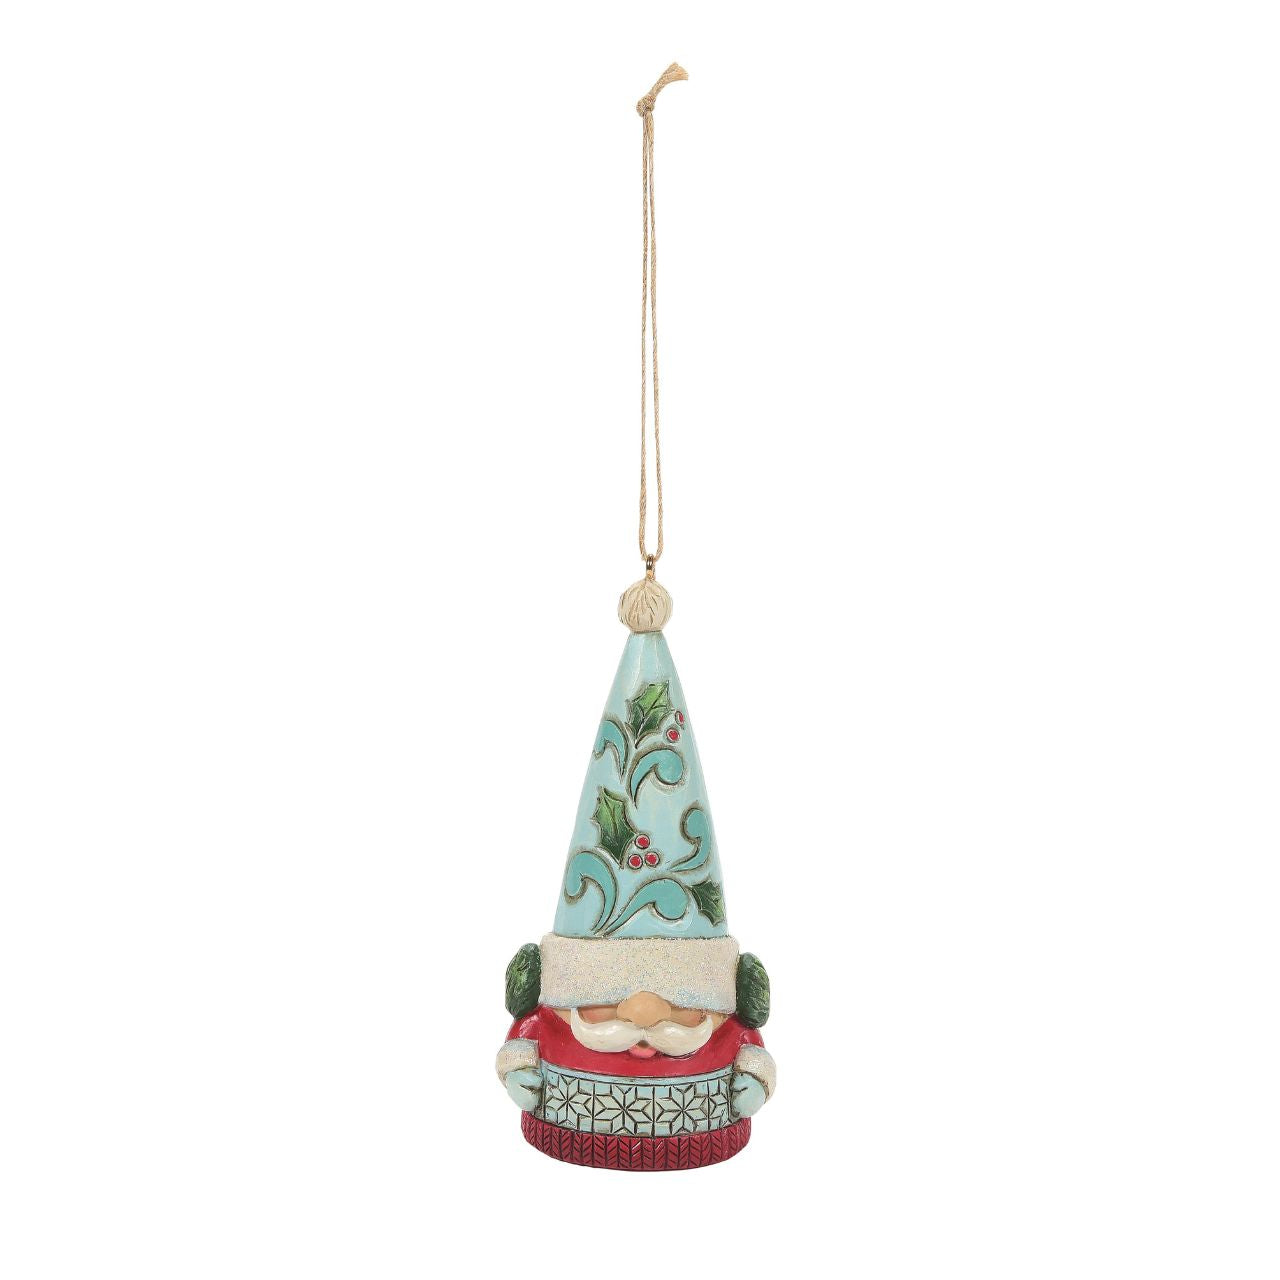 Jim Shore Winter Wonderland Gnome Hanging Christmas Ornament  Winter Wonderland Collection; Bright jewel tones, metallic shimmering and pearlized finishes and coloured glitter accents. This super cute Gnome Hanging Ornament is the perfect addition to any Christmas Tree.